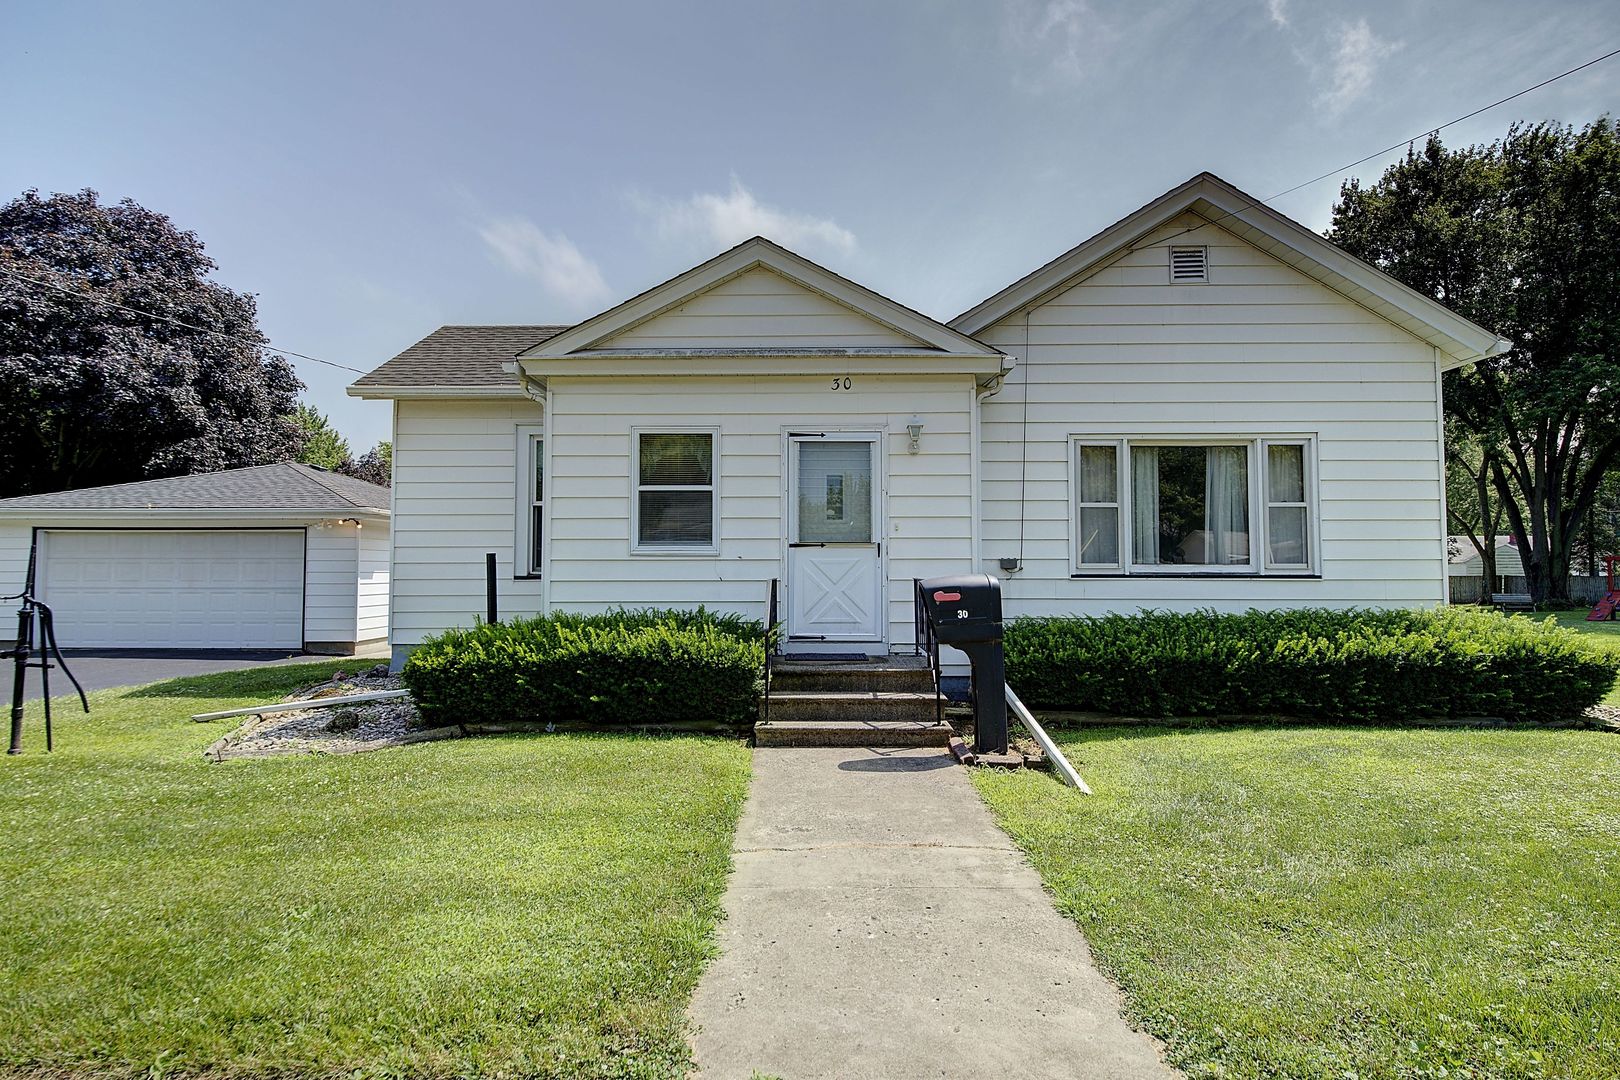 30 Boulevard Street Sandwich Il 60548 Us Aurora Home For Sale Kathy Brothers Real Estate